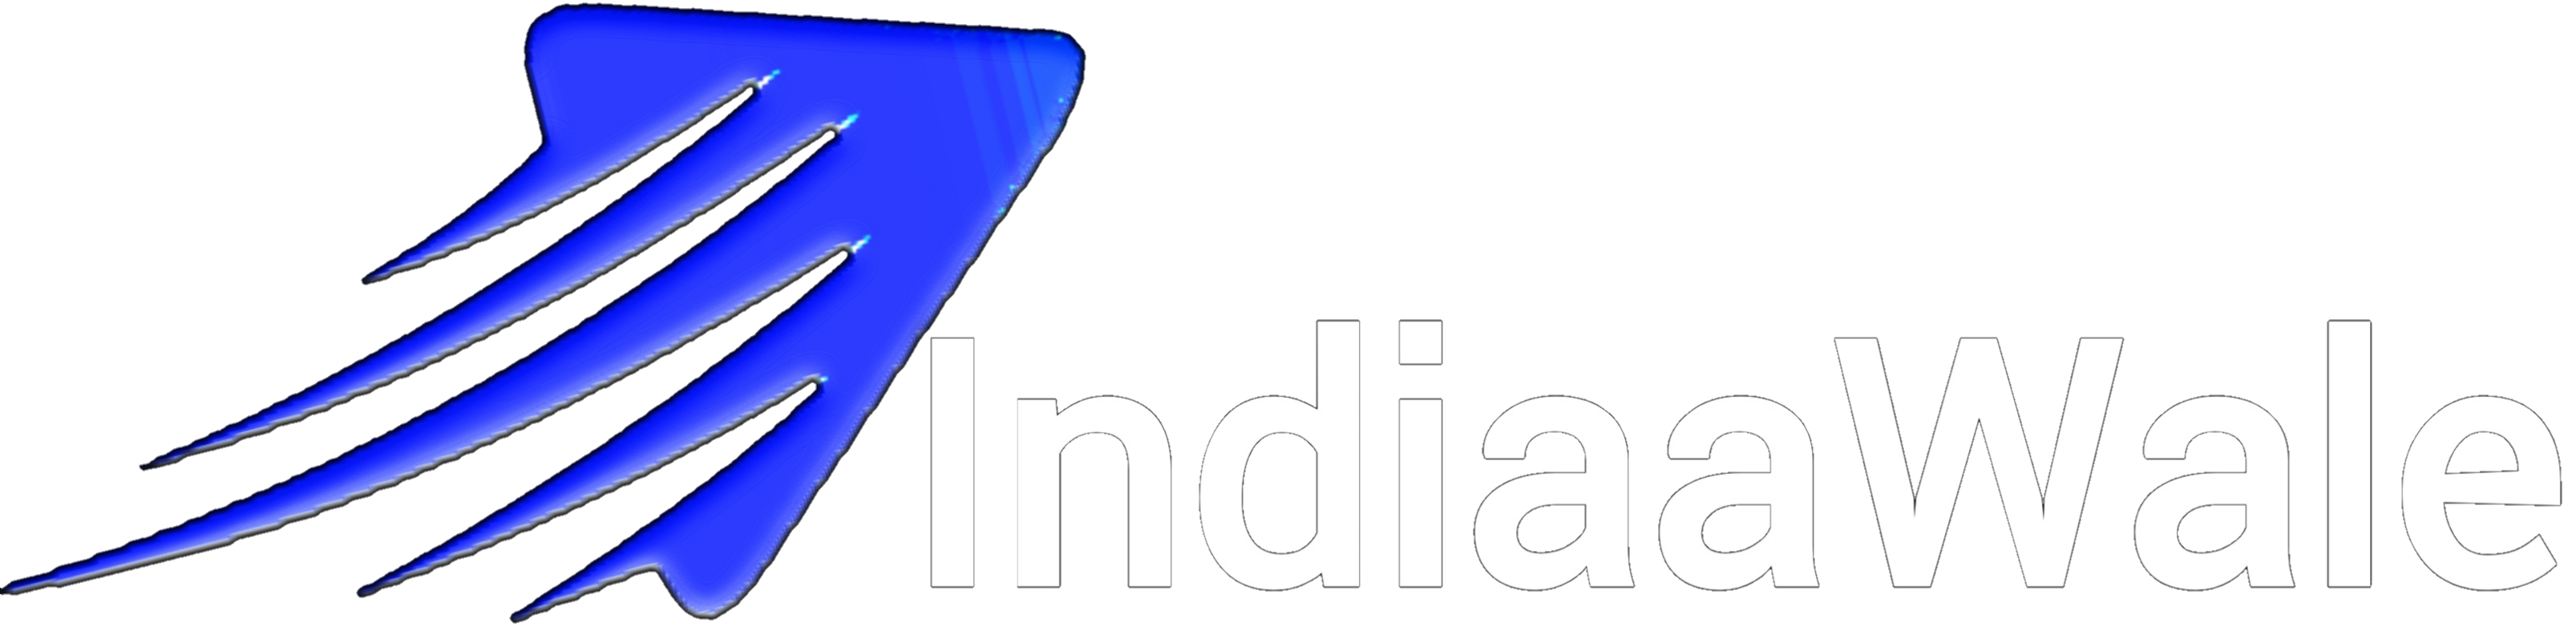 Latest Artical, Breaking News, Stories, Trending Topics –Indiaawale